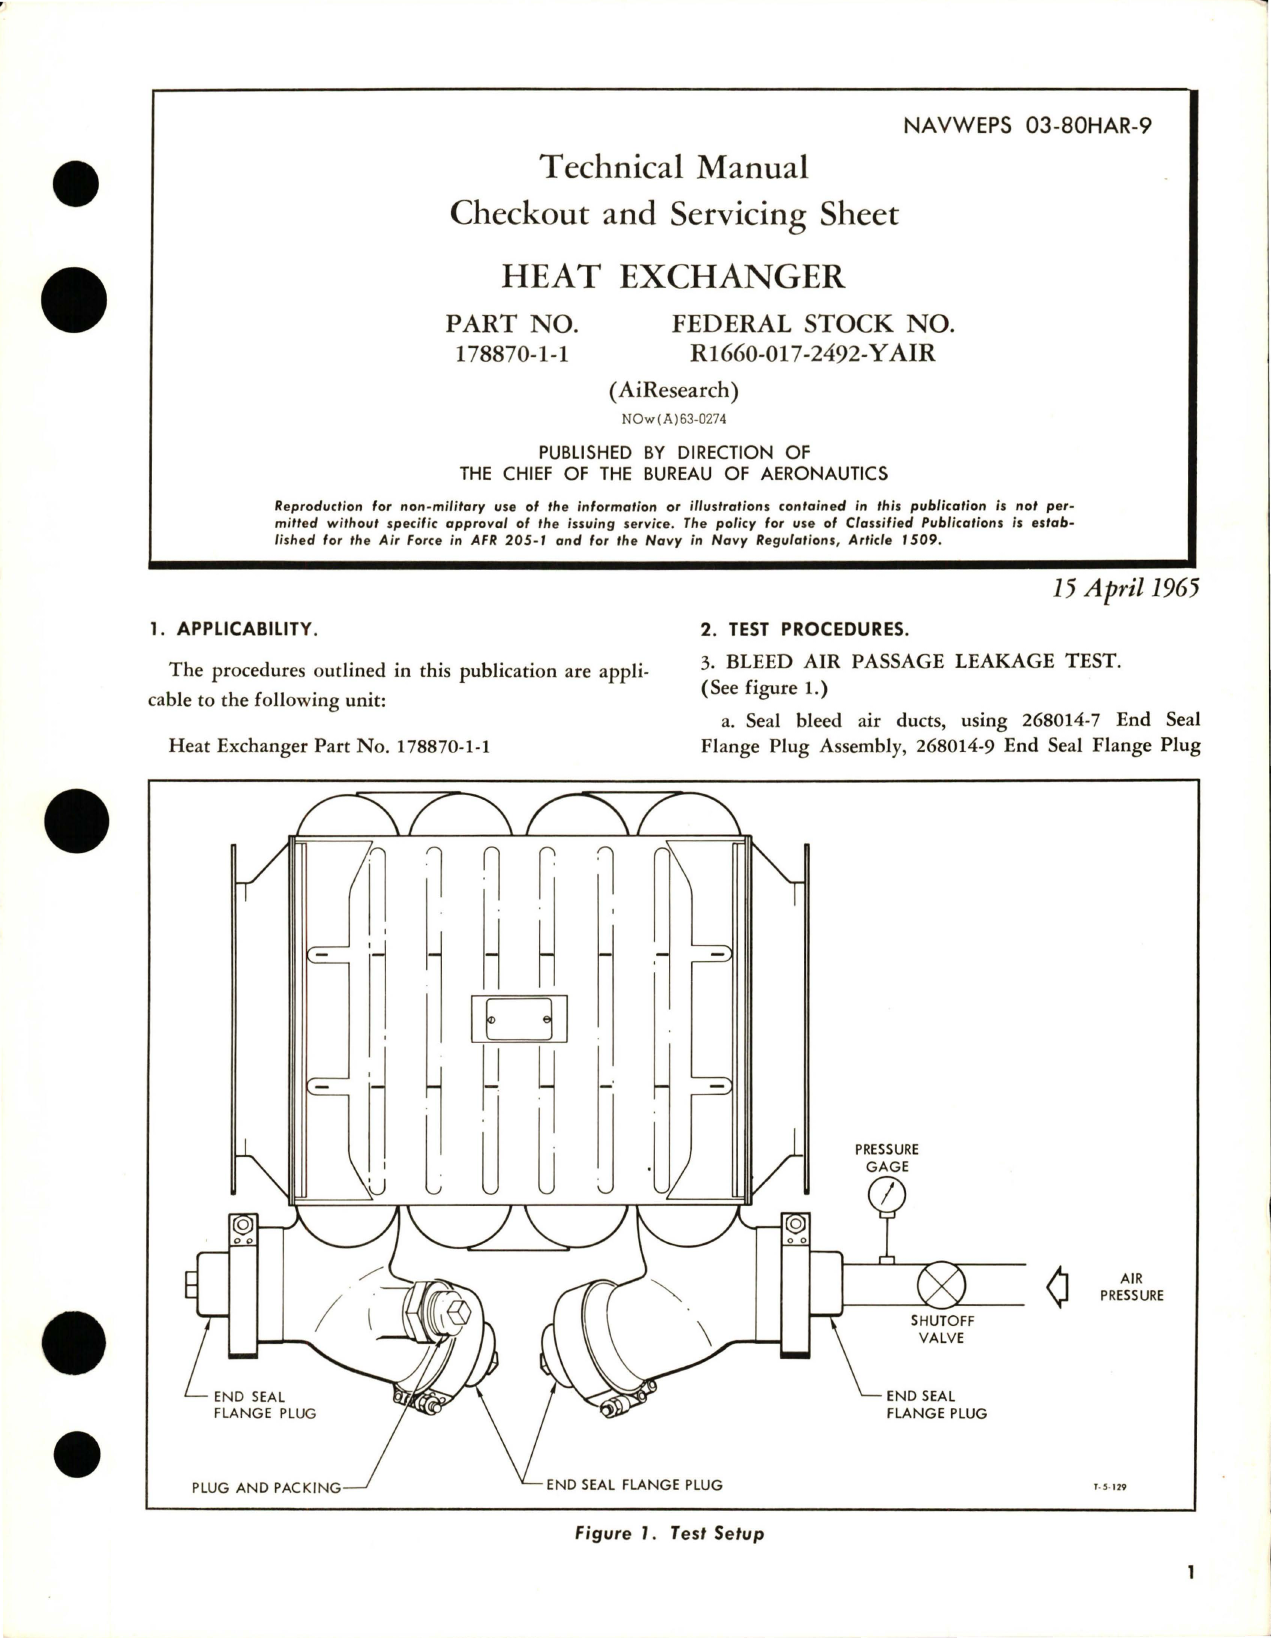 Sample page 1 from AirCorps Library document: Checkout and Servicing Sheet for Heat Exchanger - Part 178870-1-1 